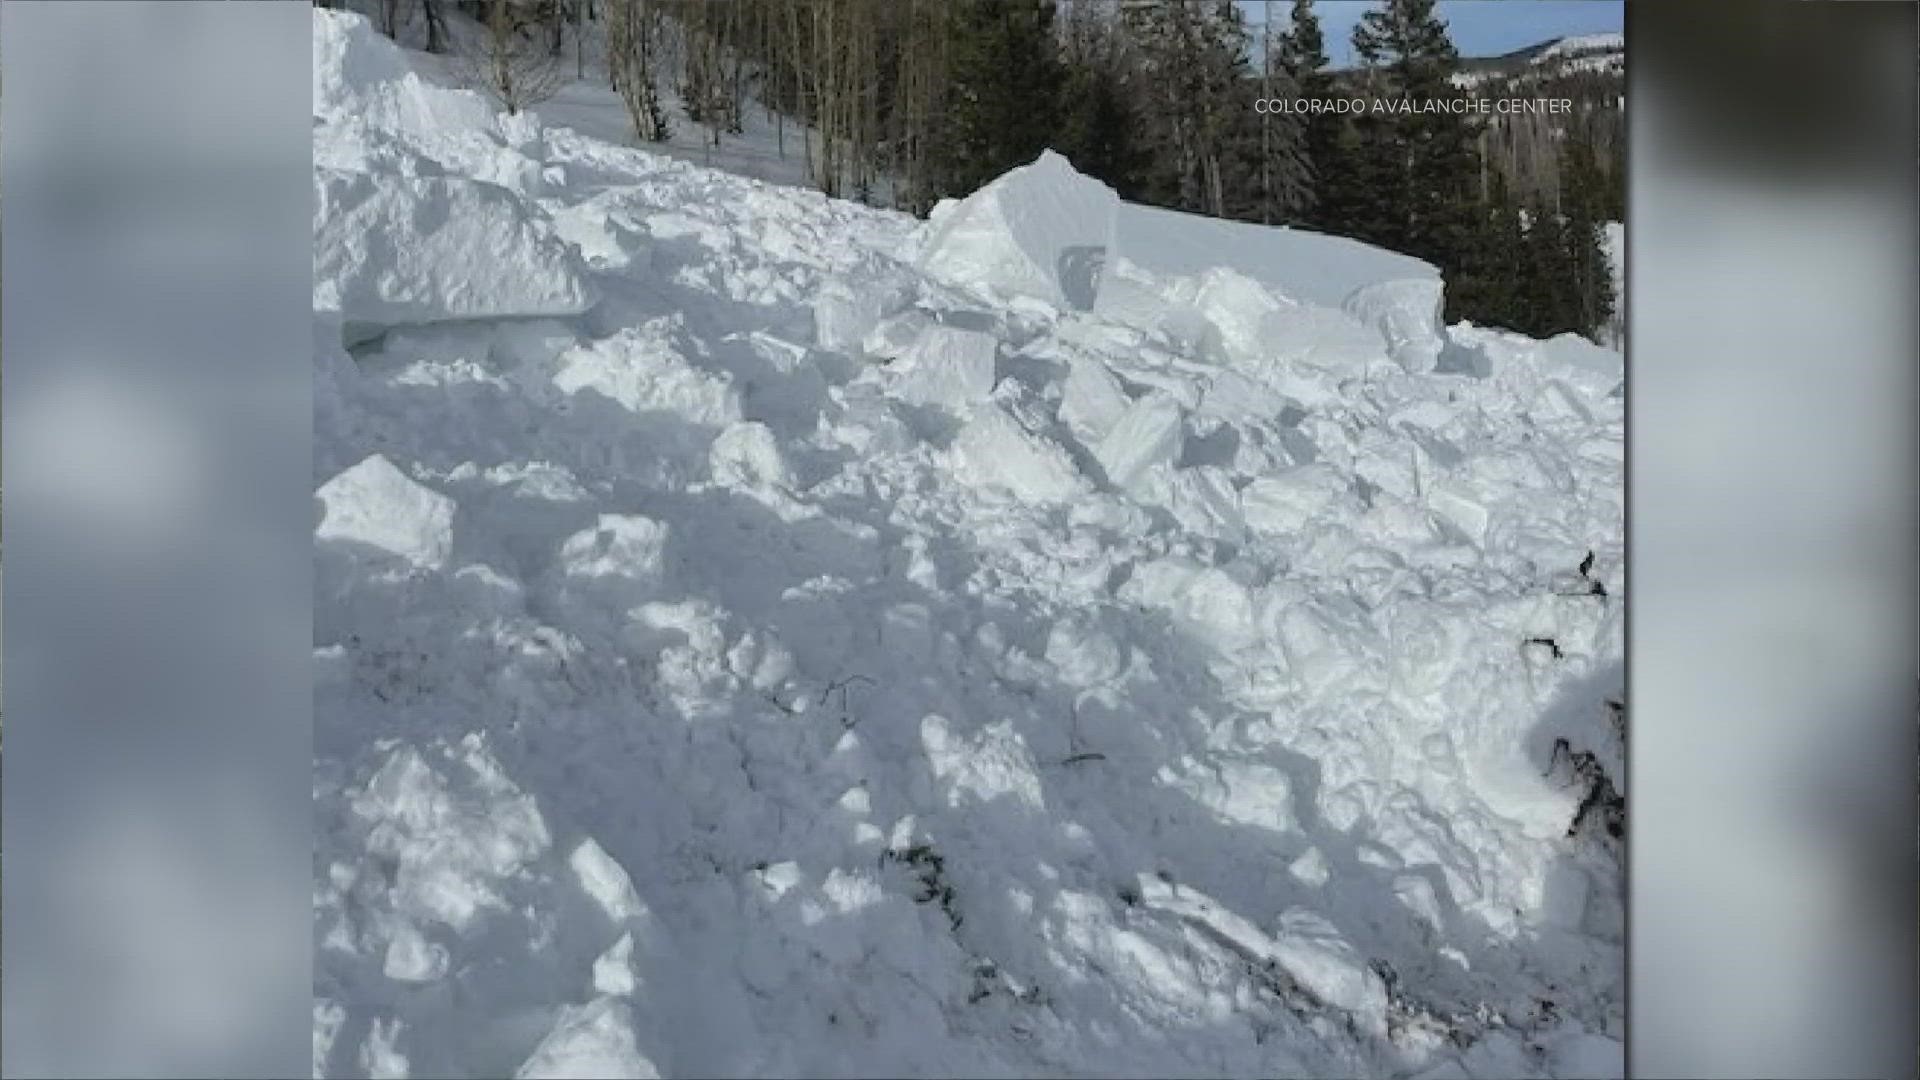 Crews on Monday recovered the body of a snowmobiler who was caught in an avalanche in southwestern Colorado.